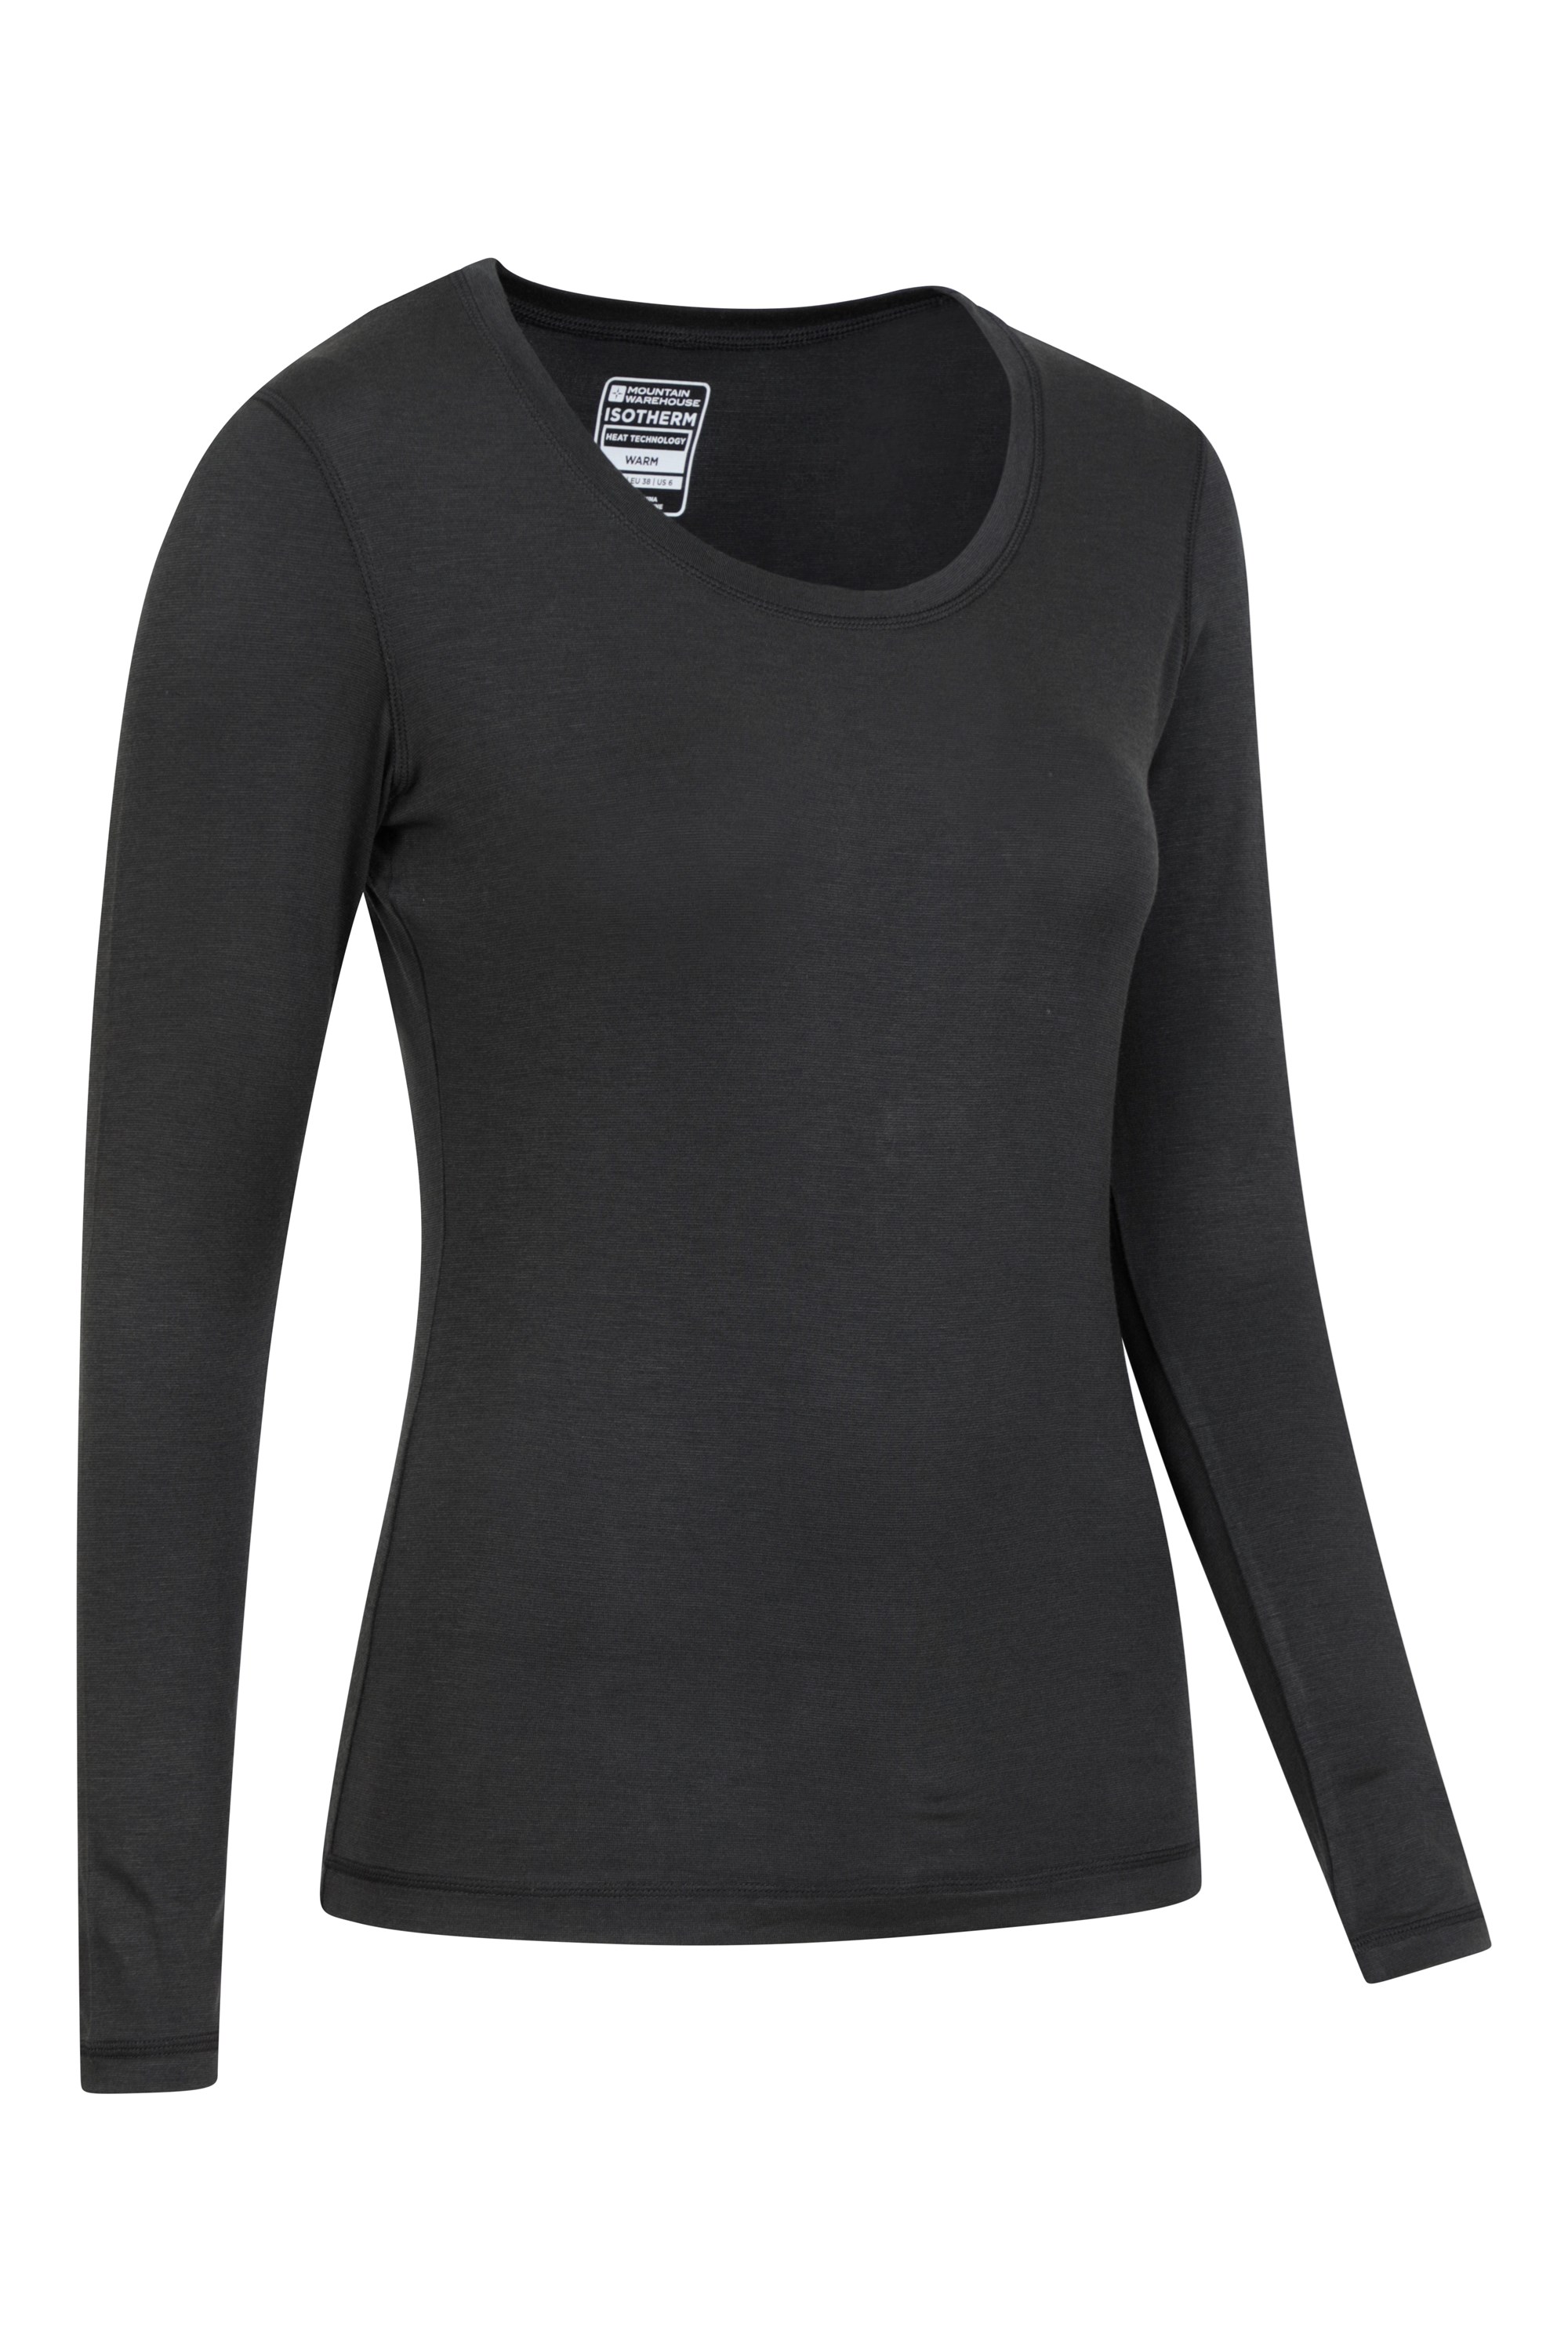  Thermajane Thermal Shirts For Women Long Sleeve